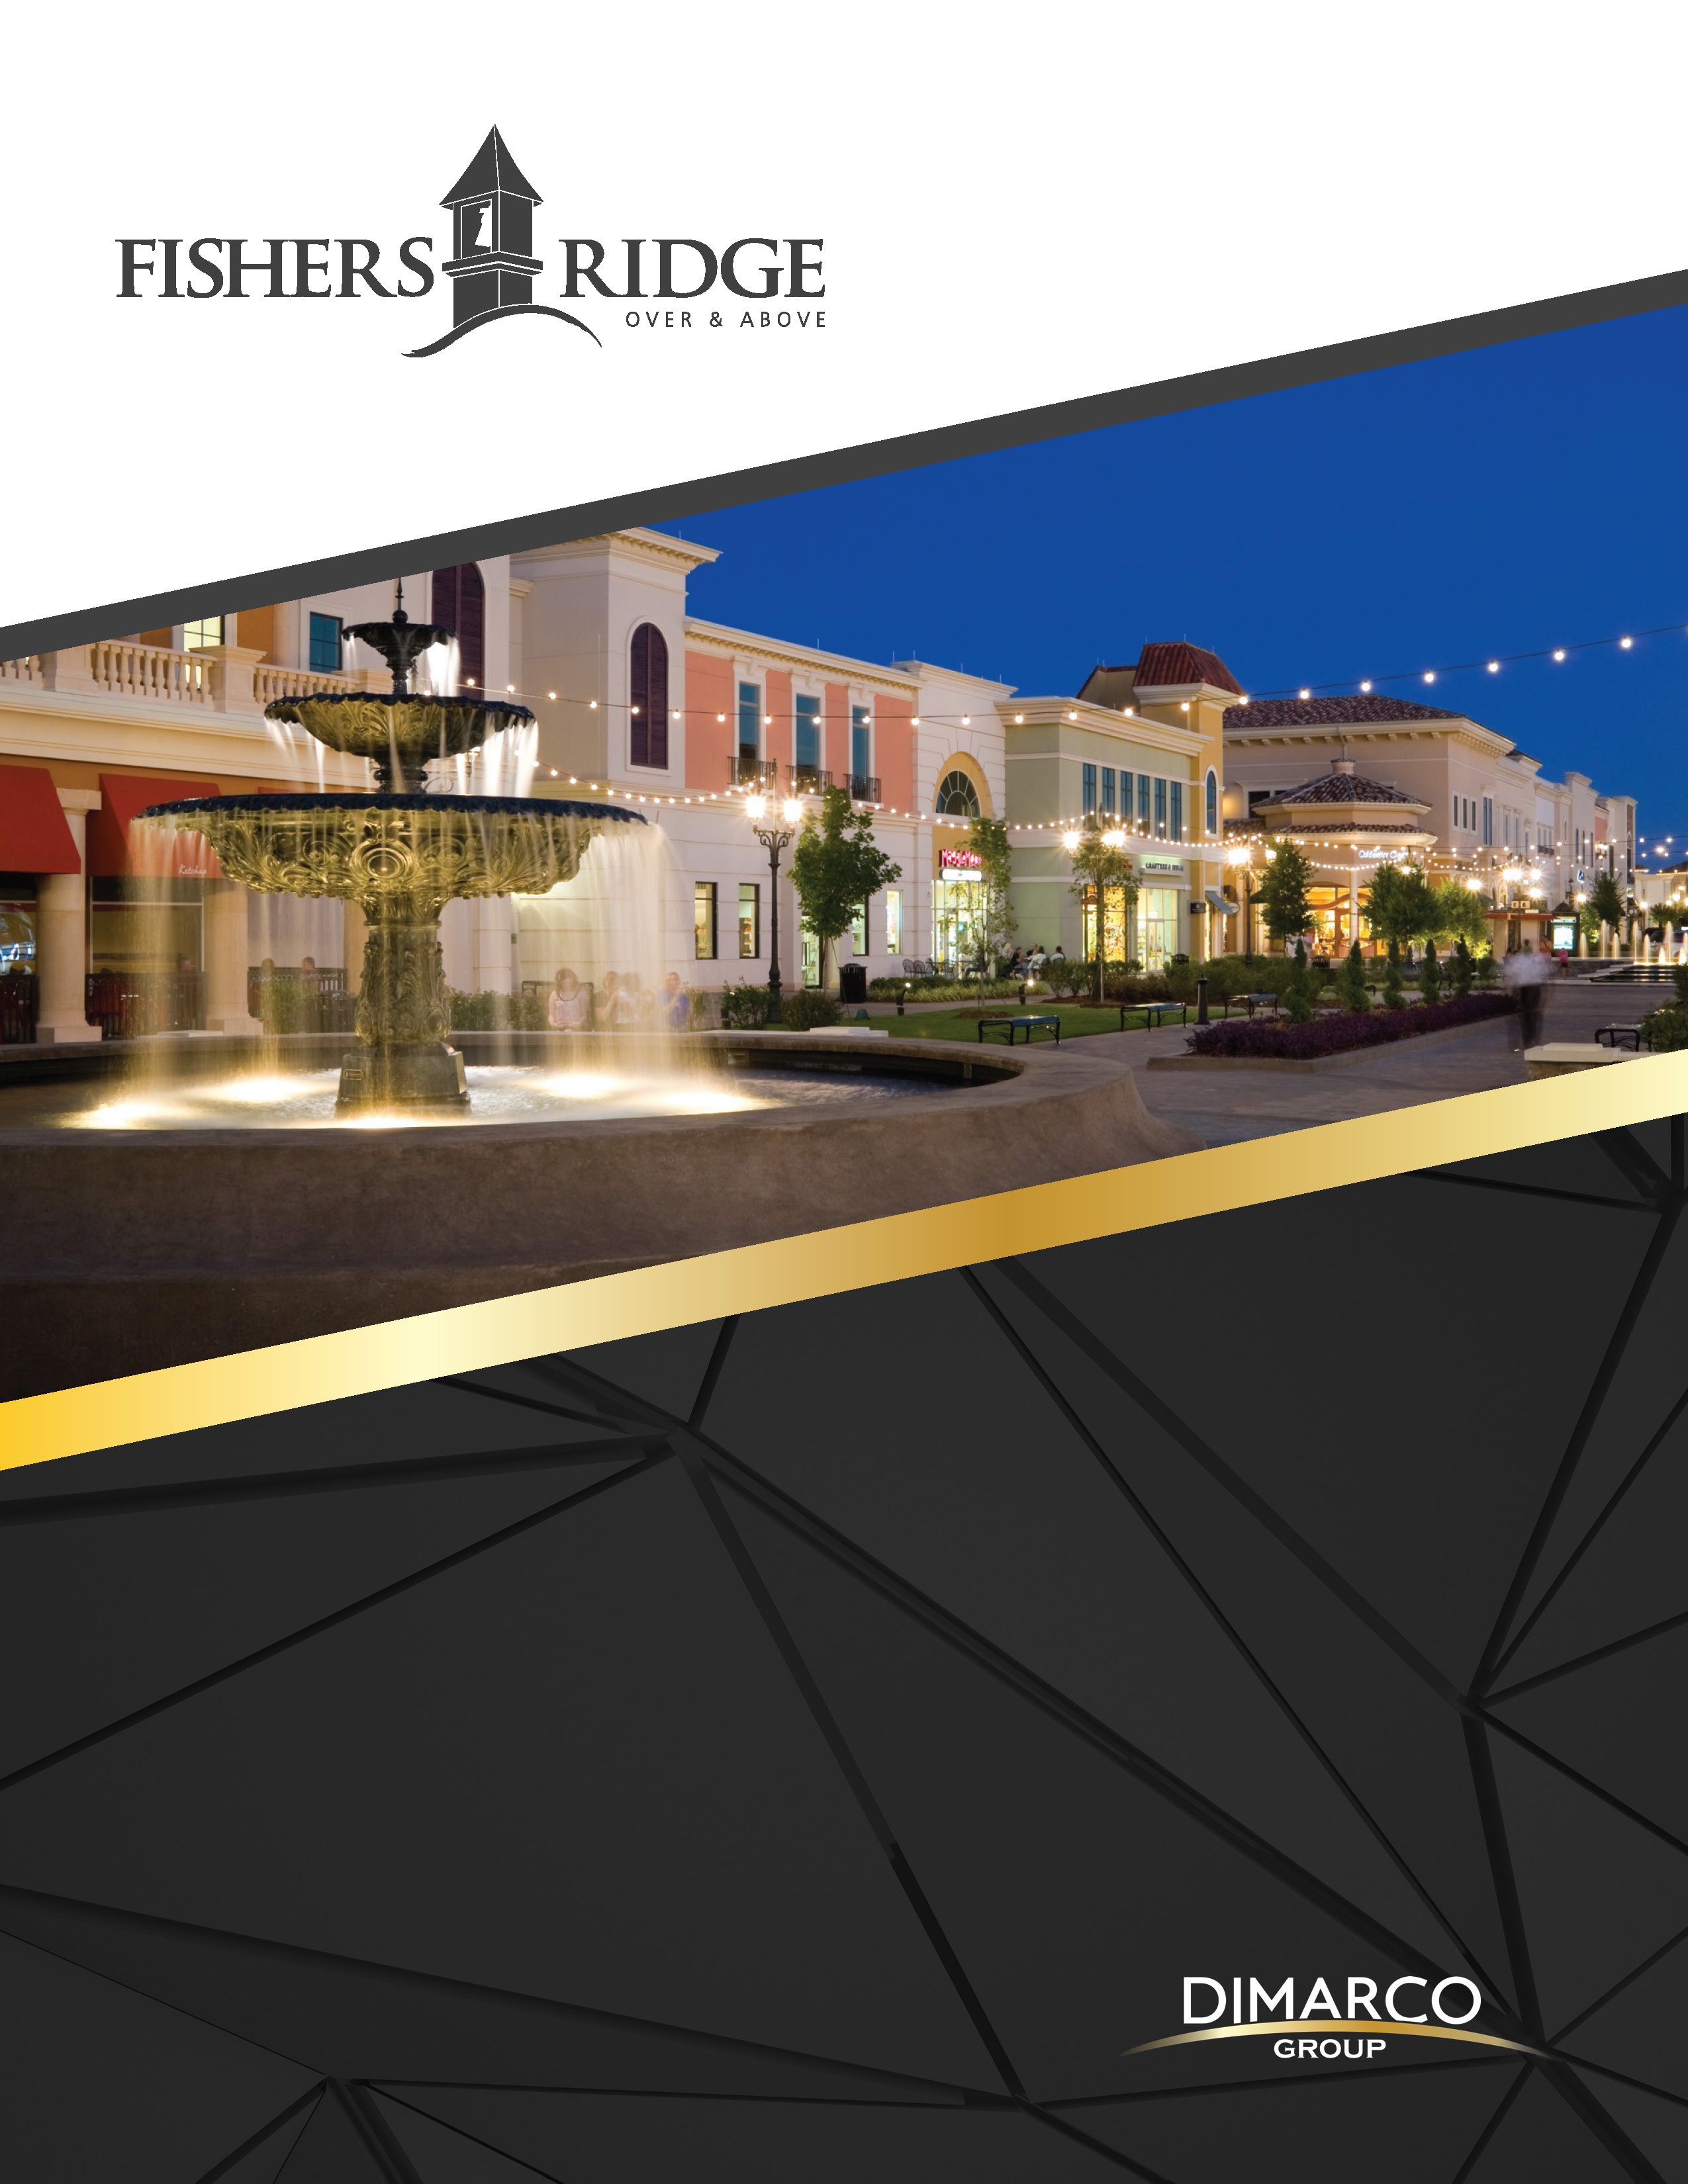 Fishers Ridge Property Overview